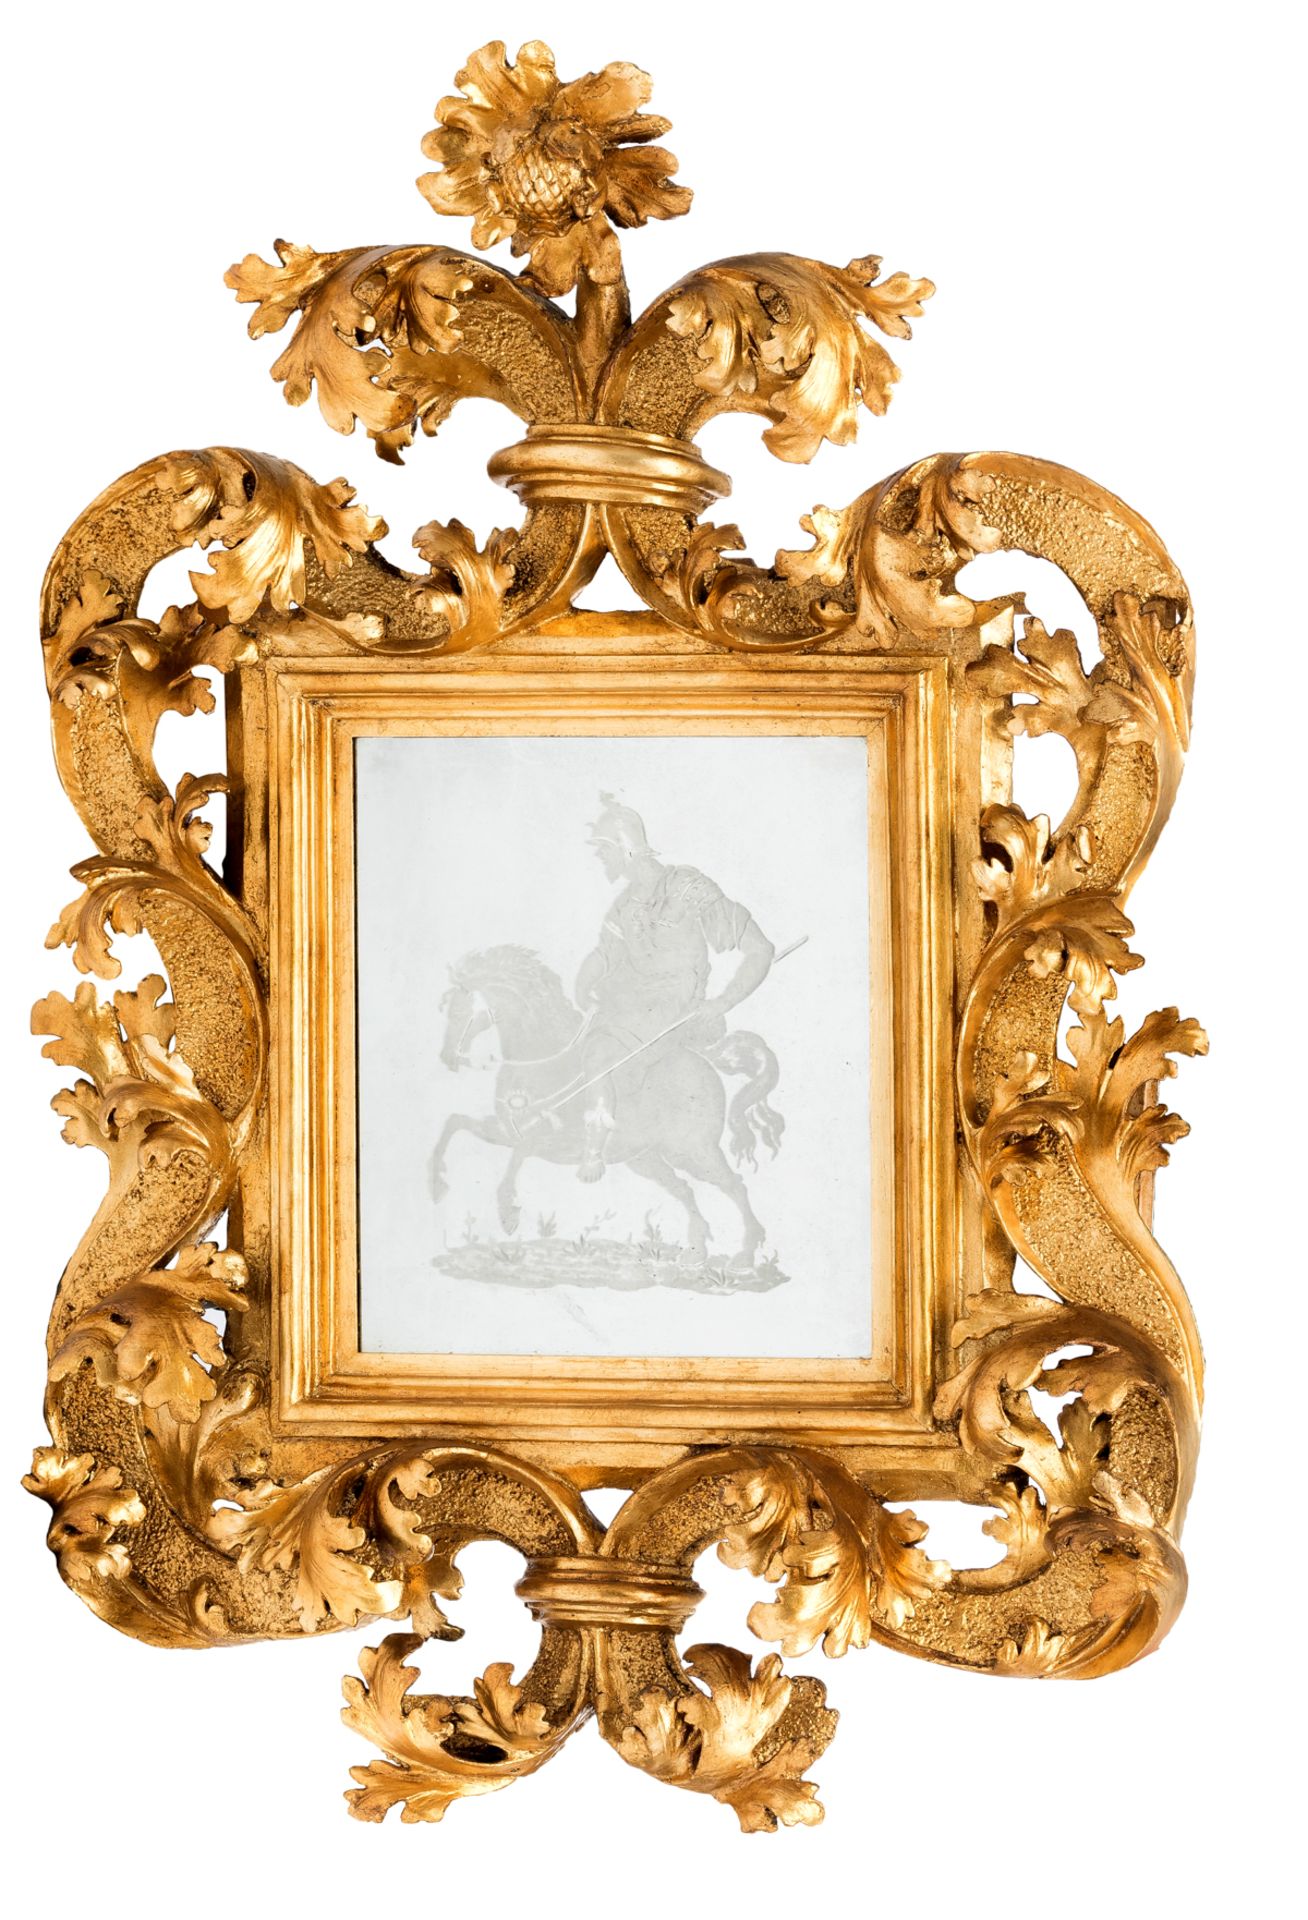 An impressive Italian Baroque mirror with a richly sculpted gilt wooden frame, the mirror with a cut